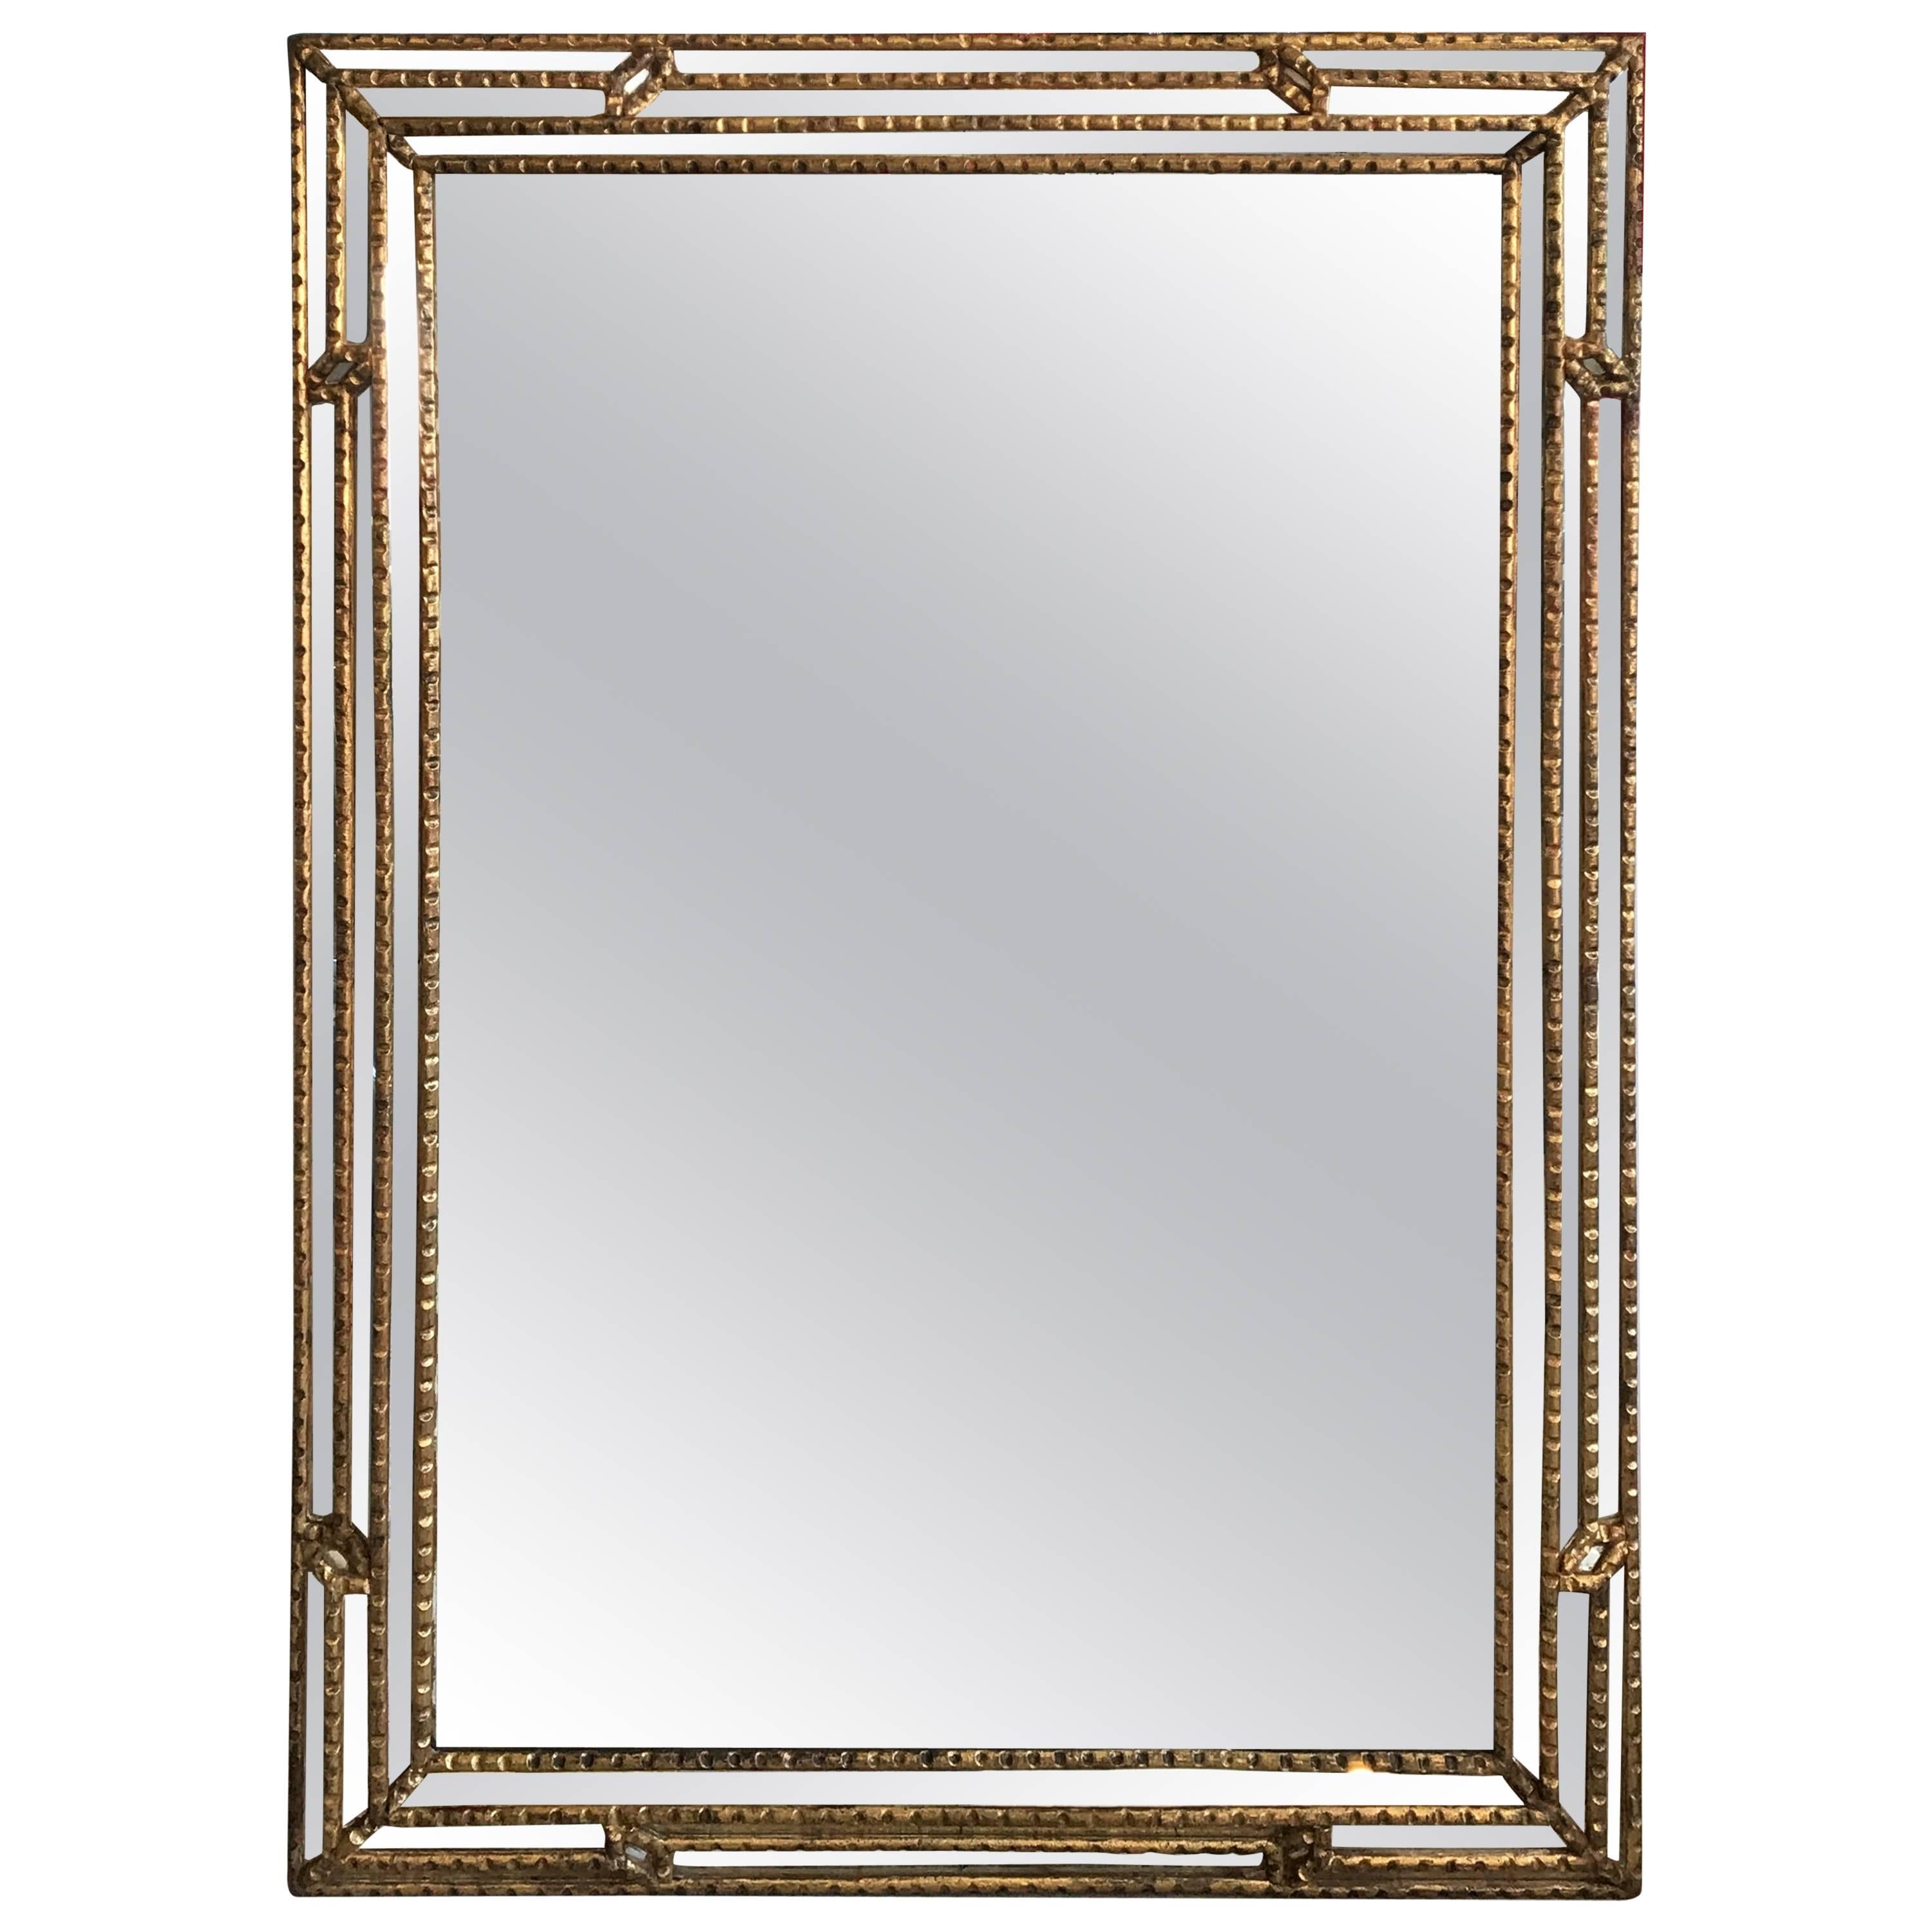 Large Early 20th Century Giltwood Regency Mirror with Mirrored Boarder, Italy